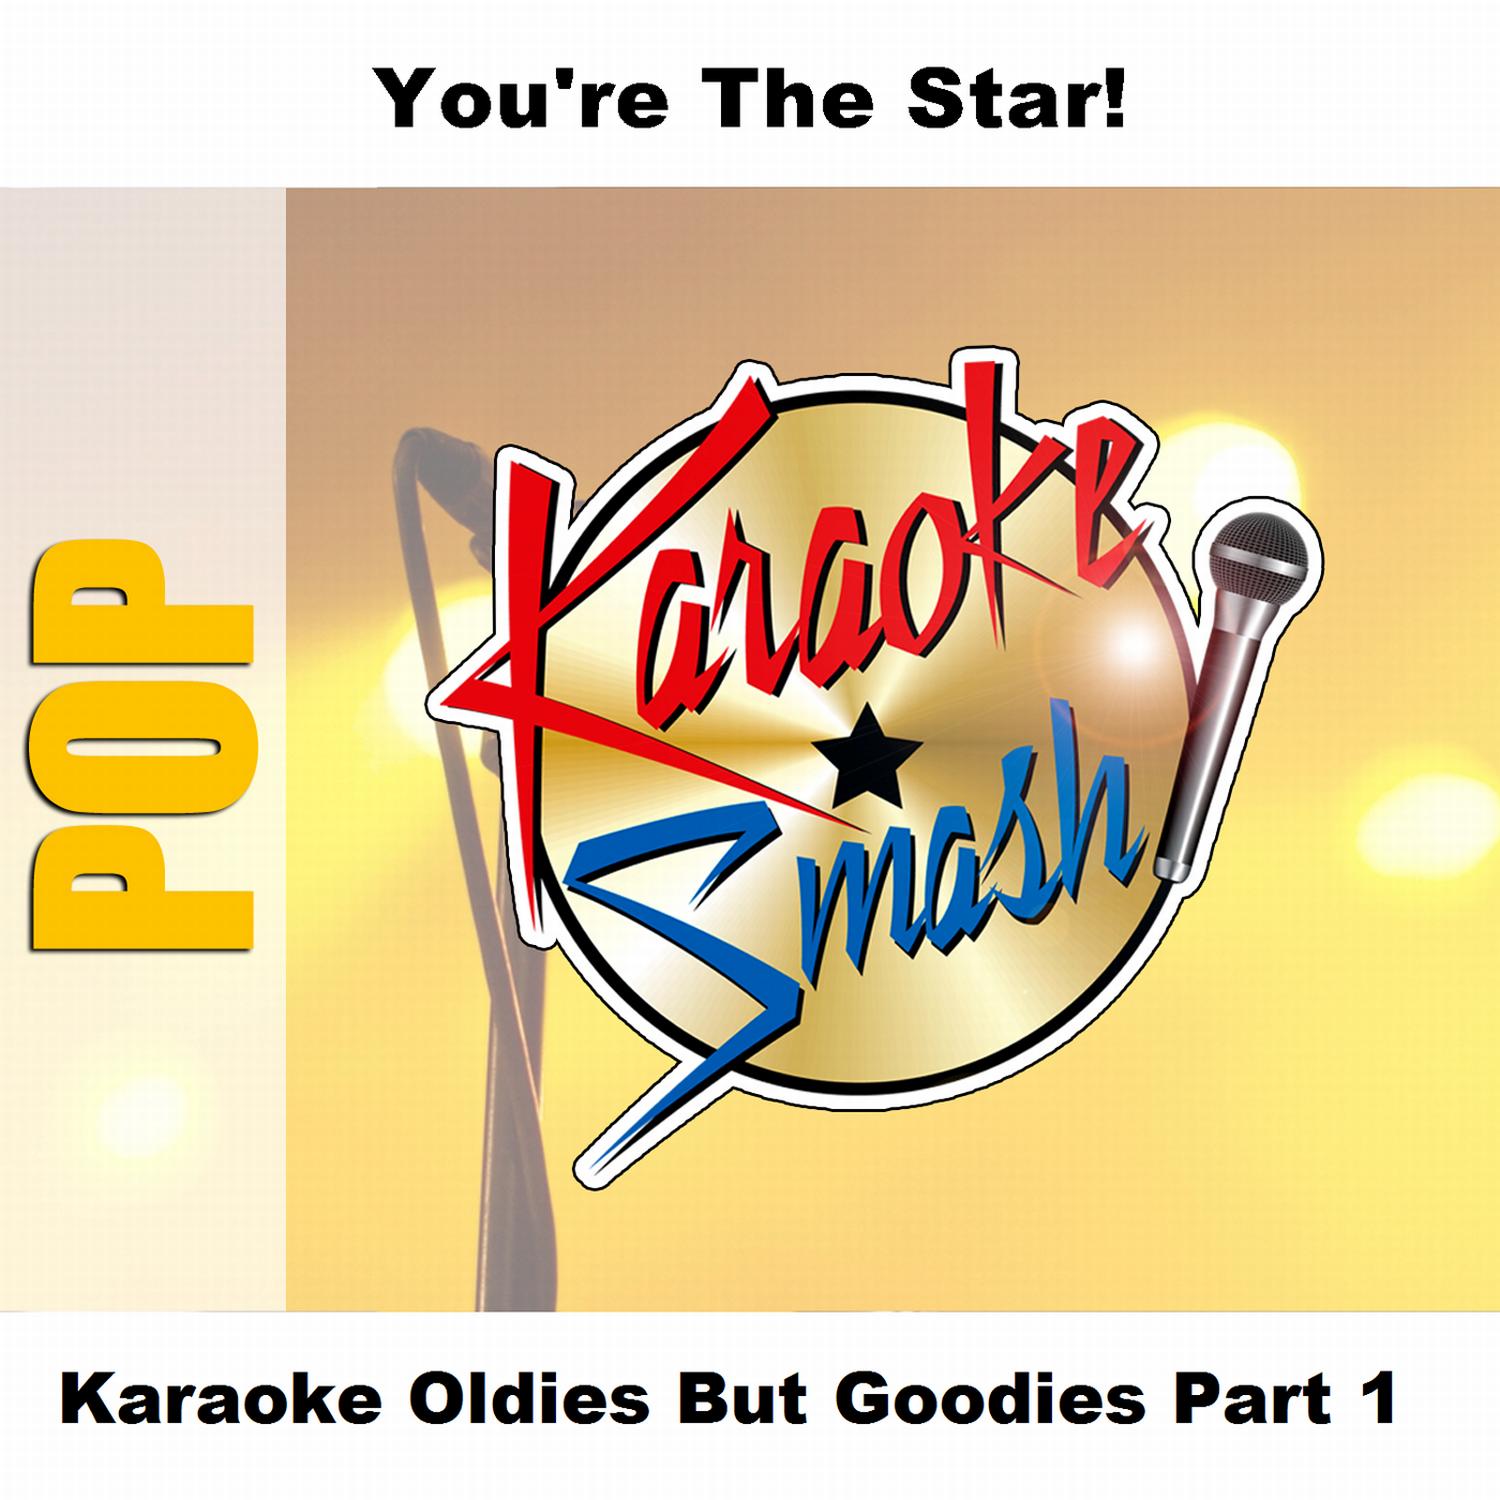 Rave On (karaoke-version) As Made Famous By: Buddy Holly